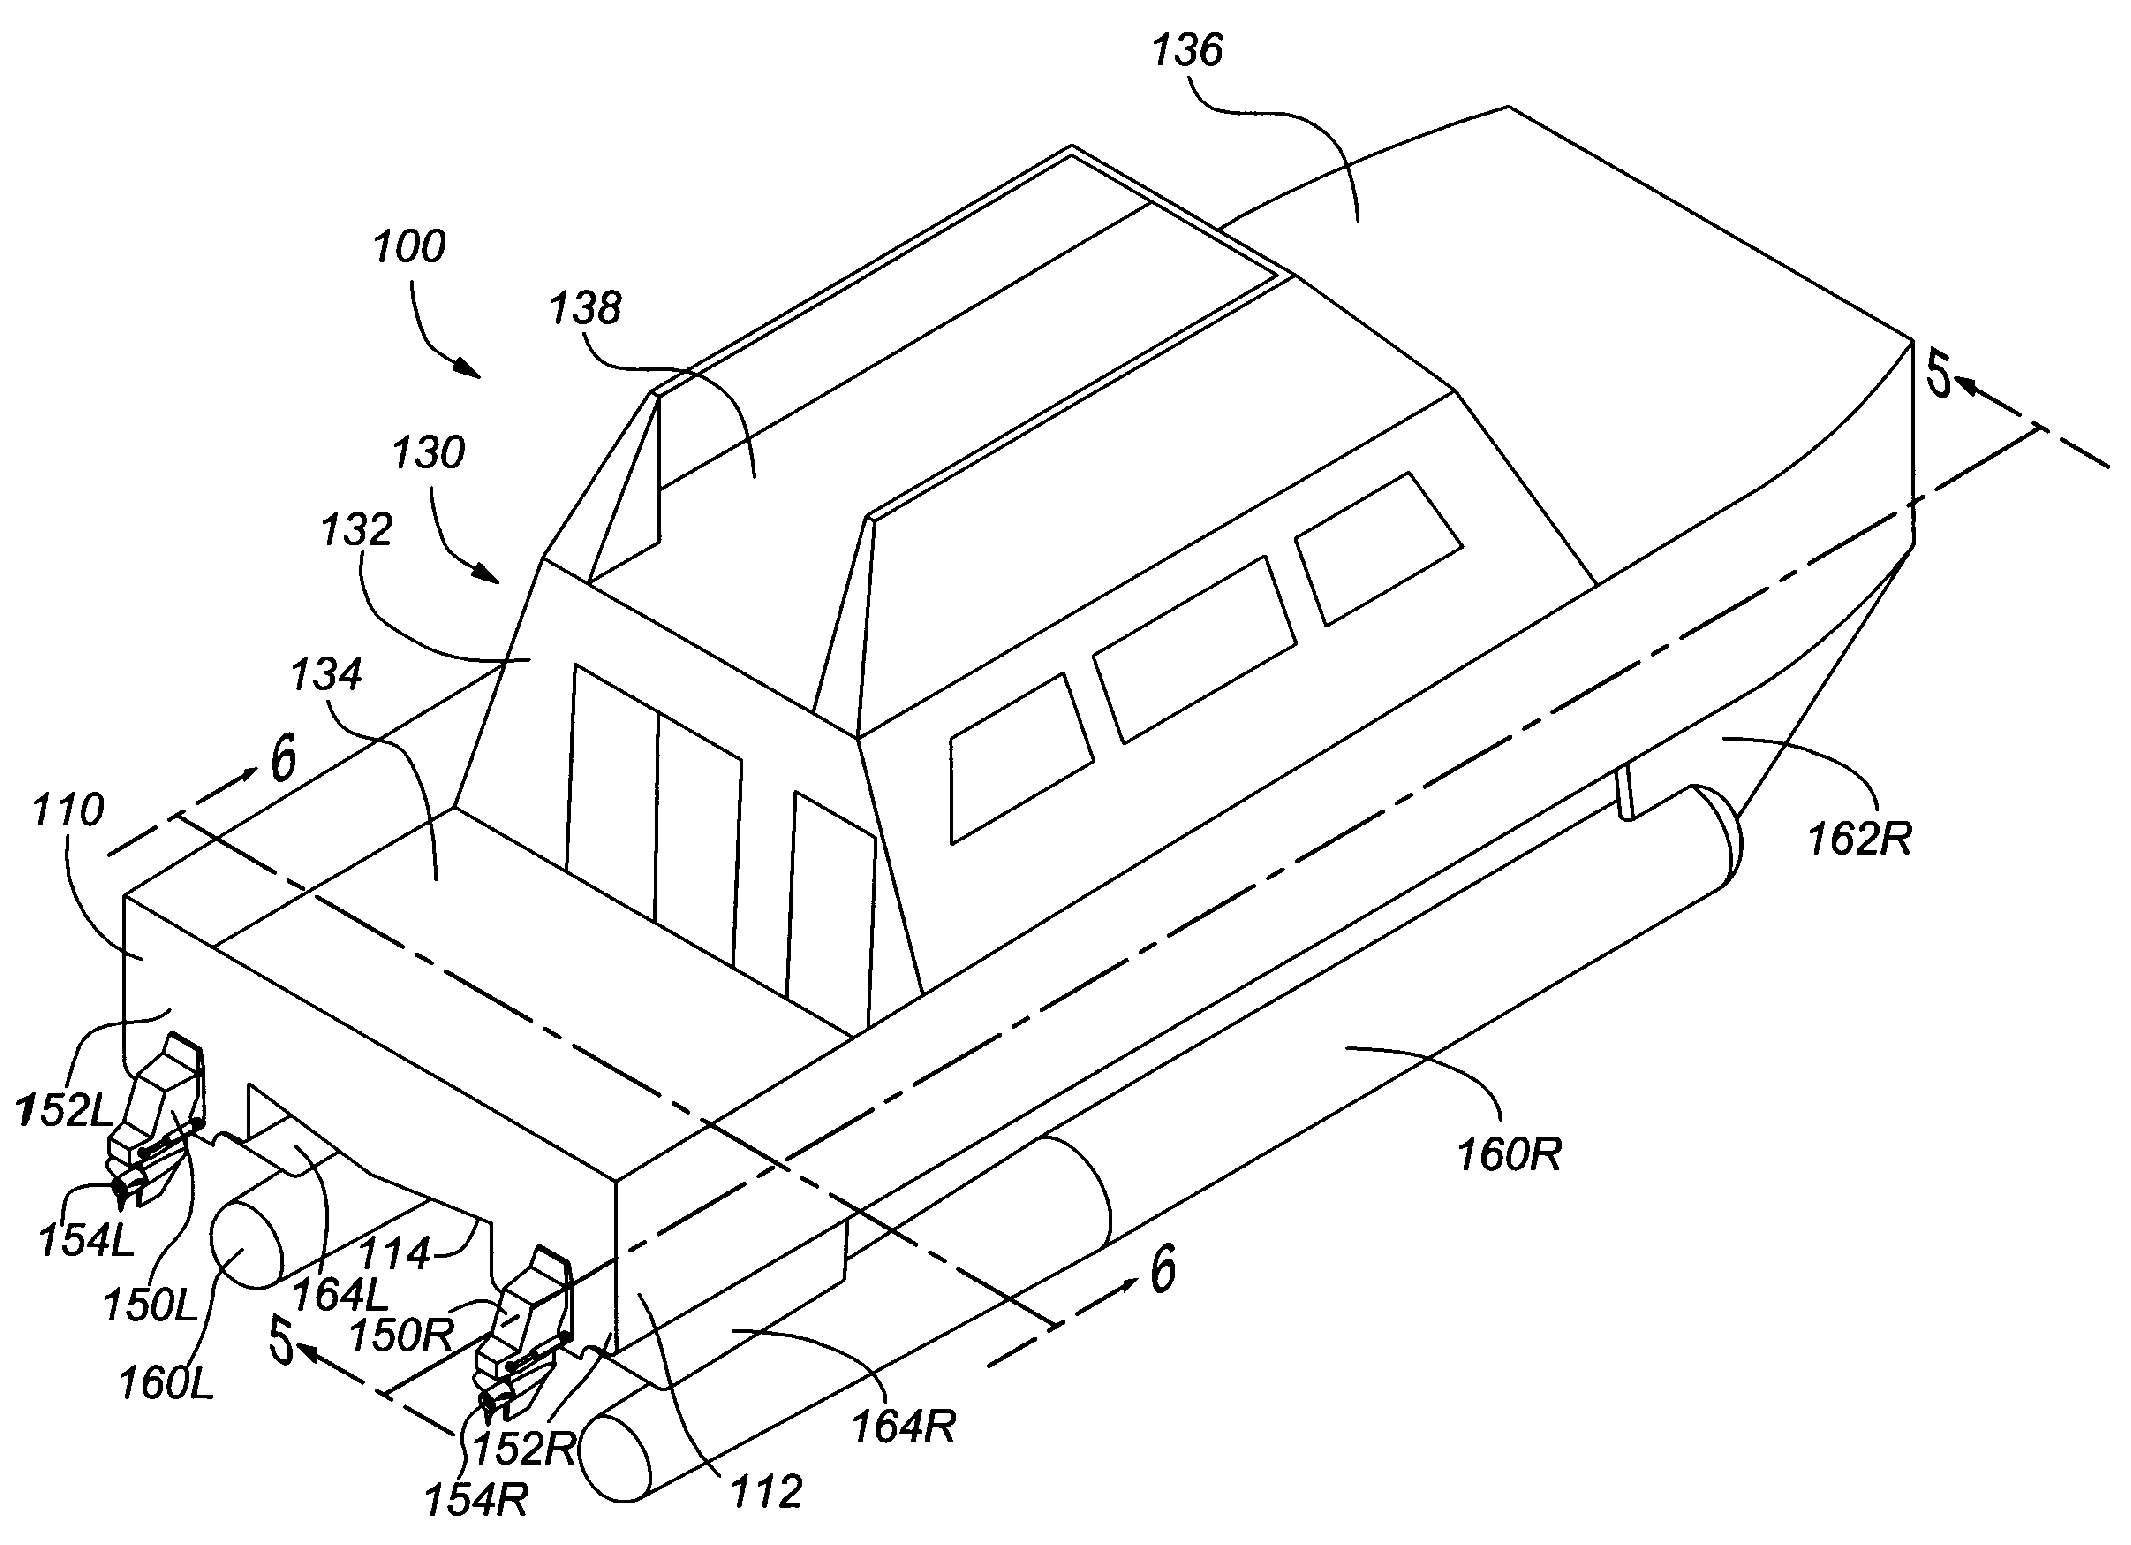 Watercraft having plural narrow hulls and having submerged passive flotation devices